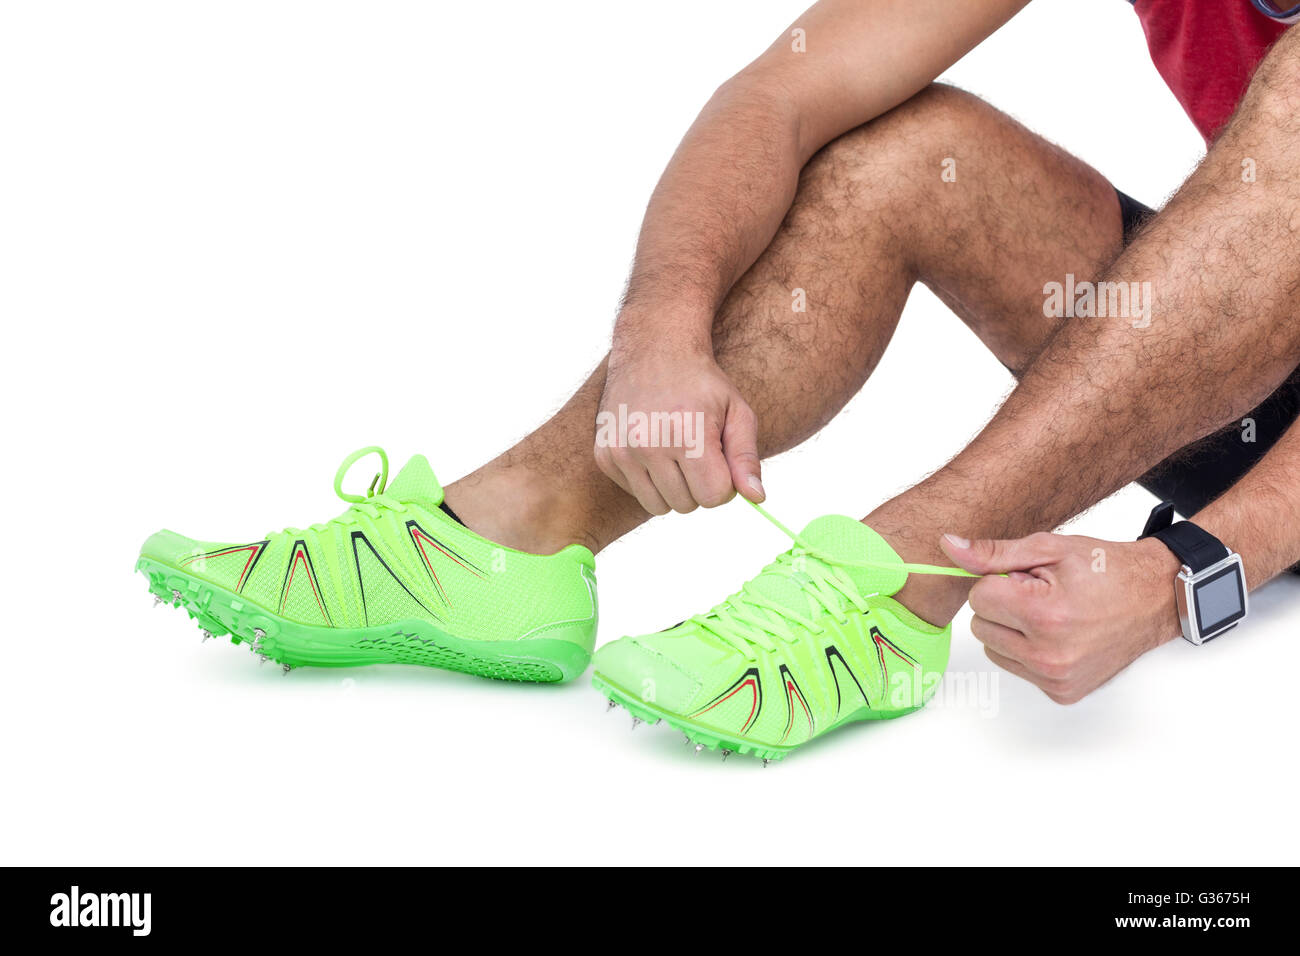 Male athlete tying his running shoes Stock Photo